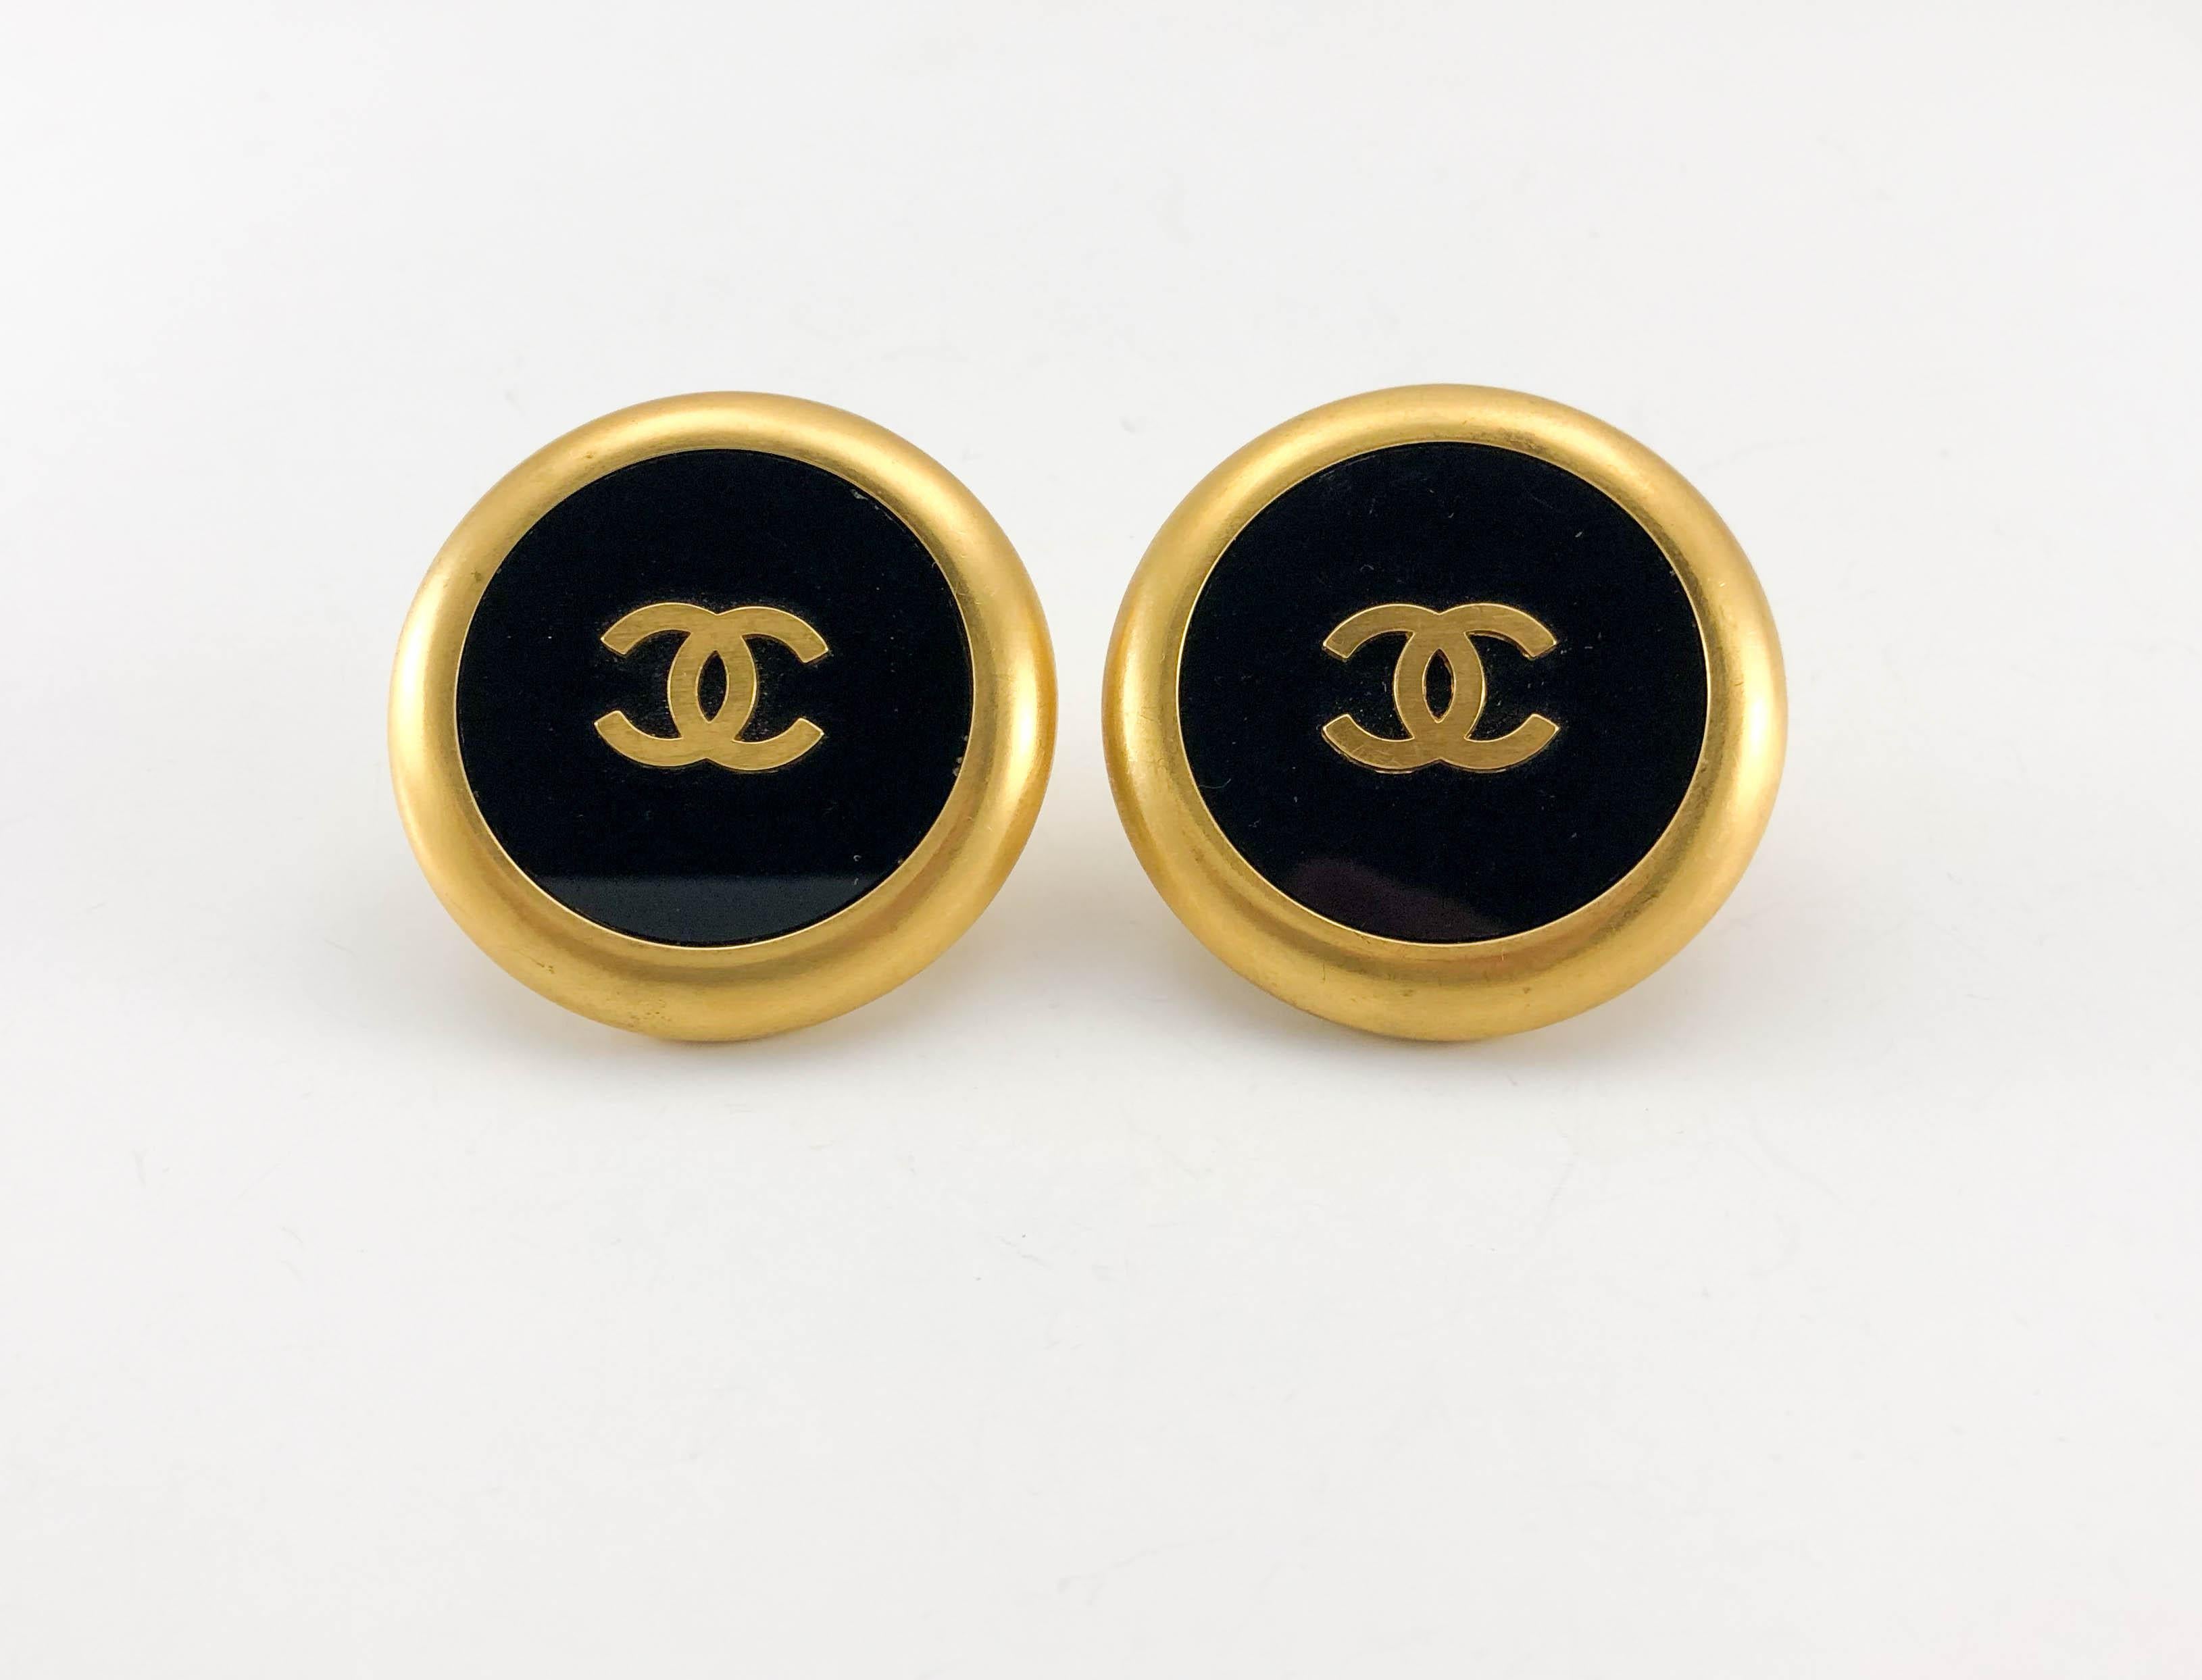 1992 Chanel Large Black And Golden Round Logo Earrings For Sale 3